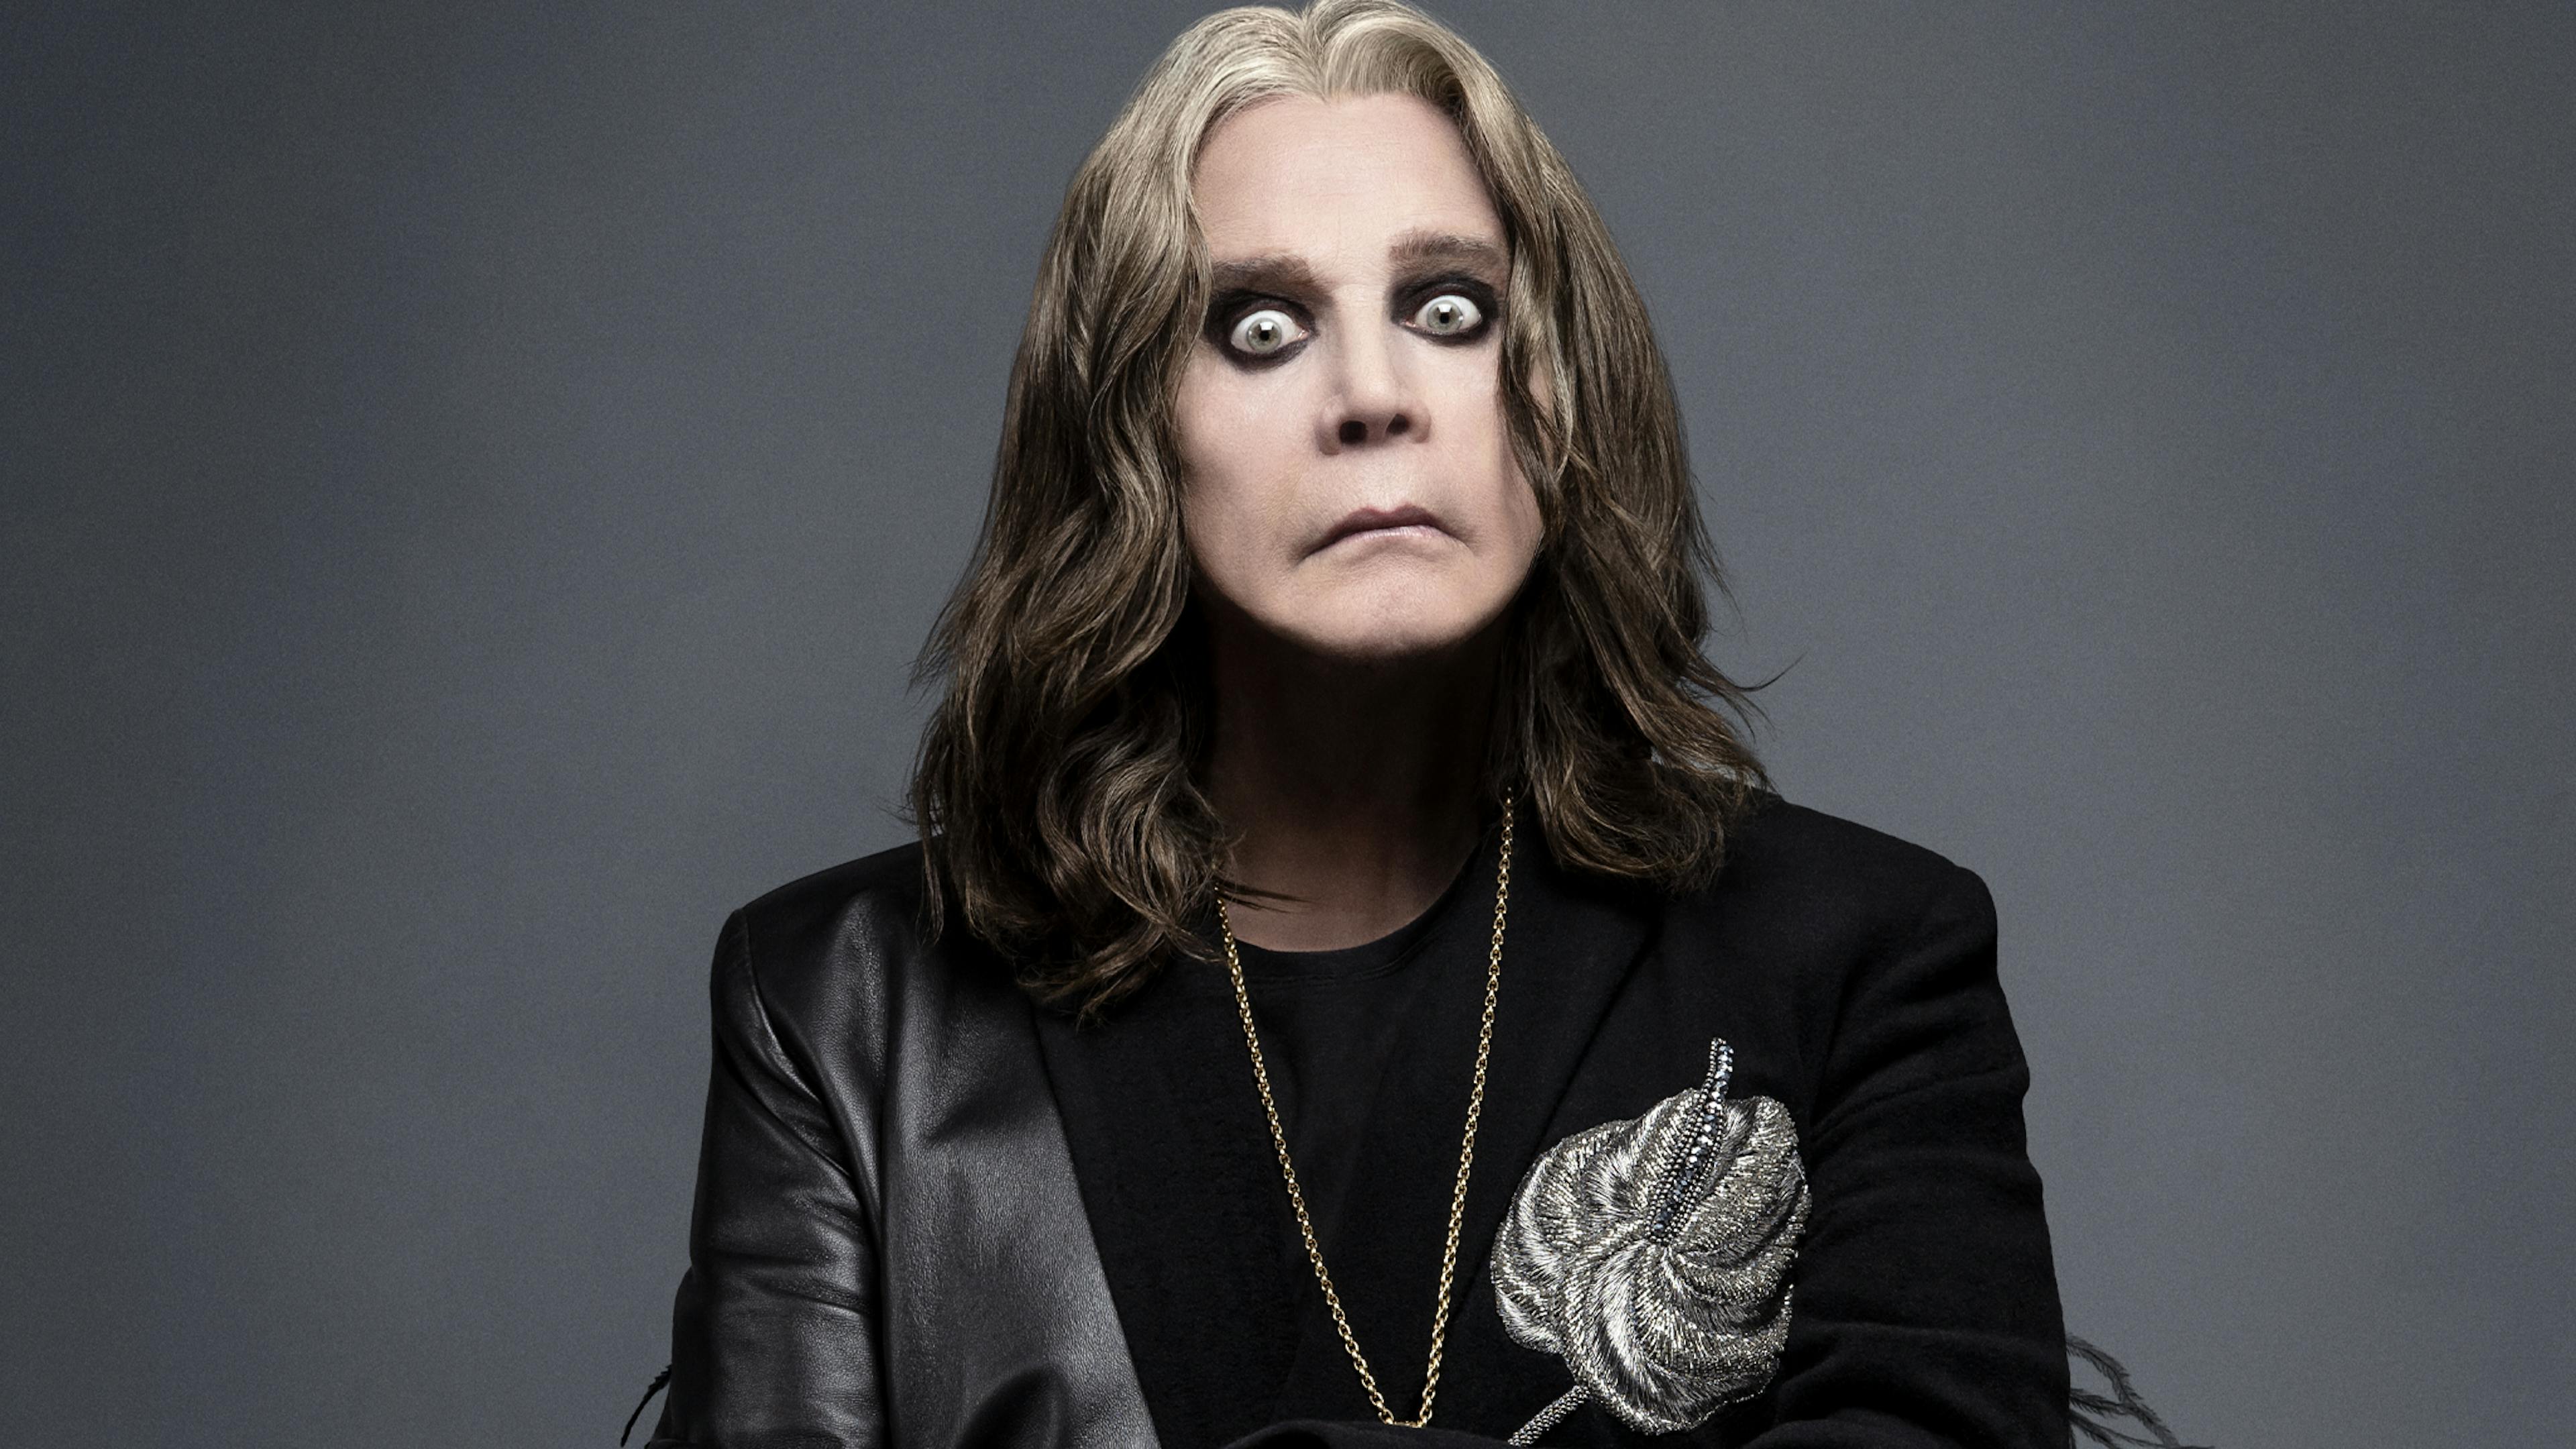 Ozzy Osbourne cancels UK and European tour: “I’m not physically capable”